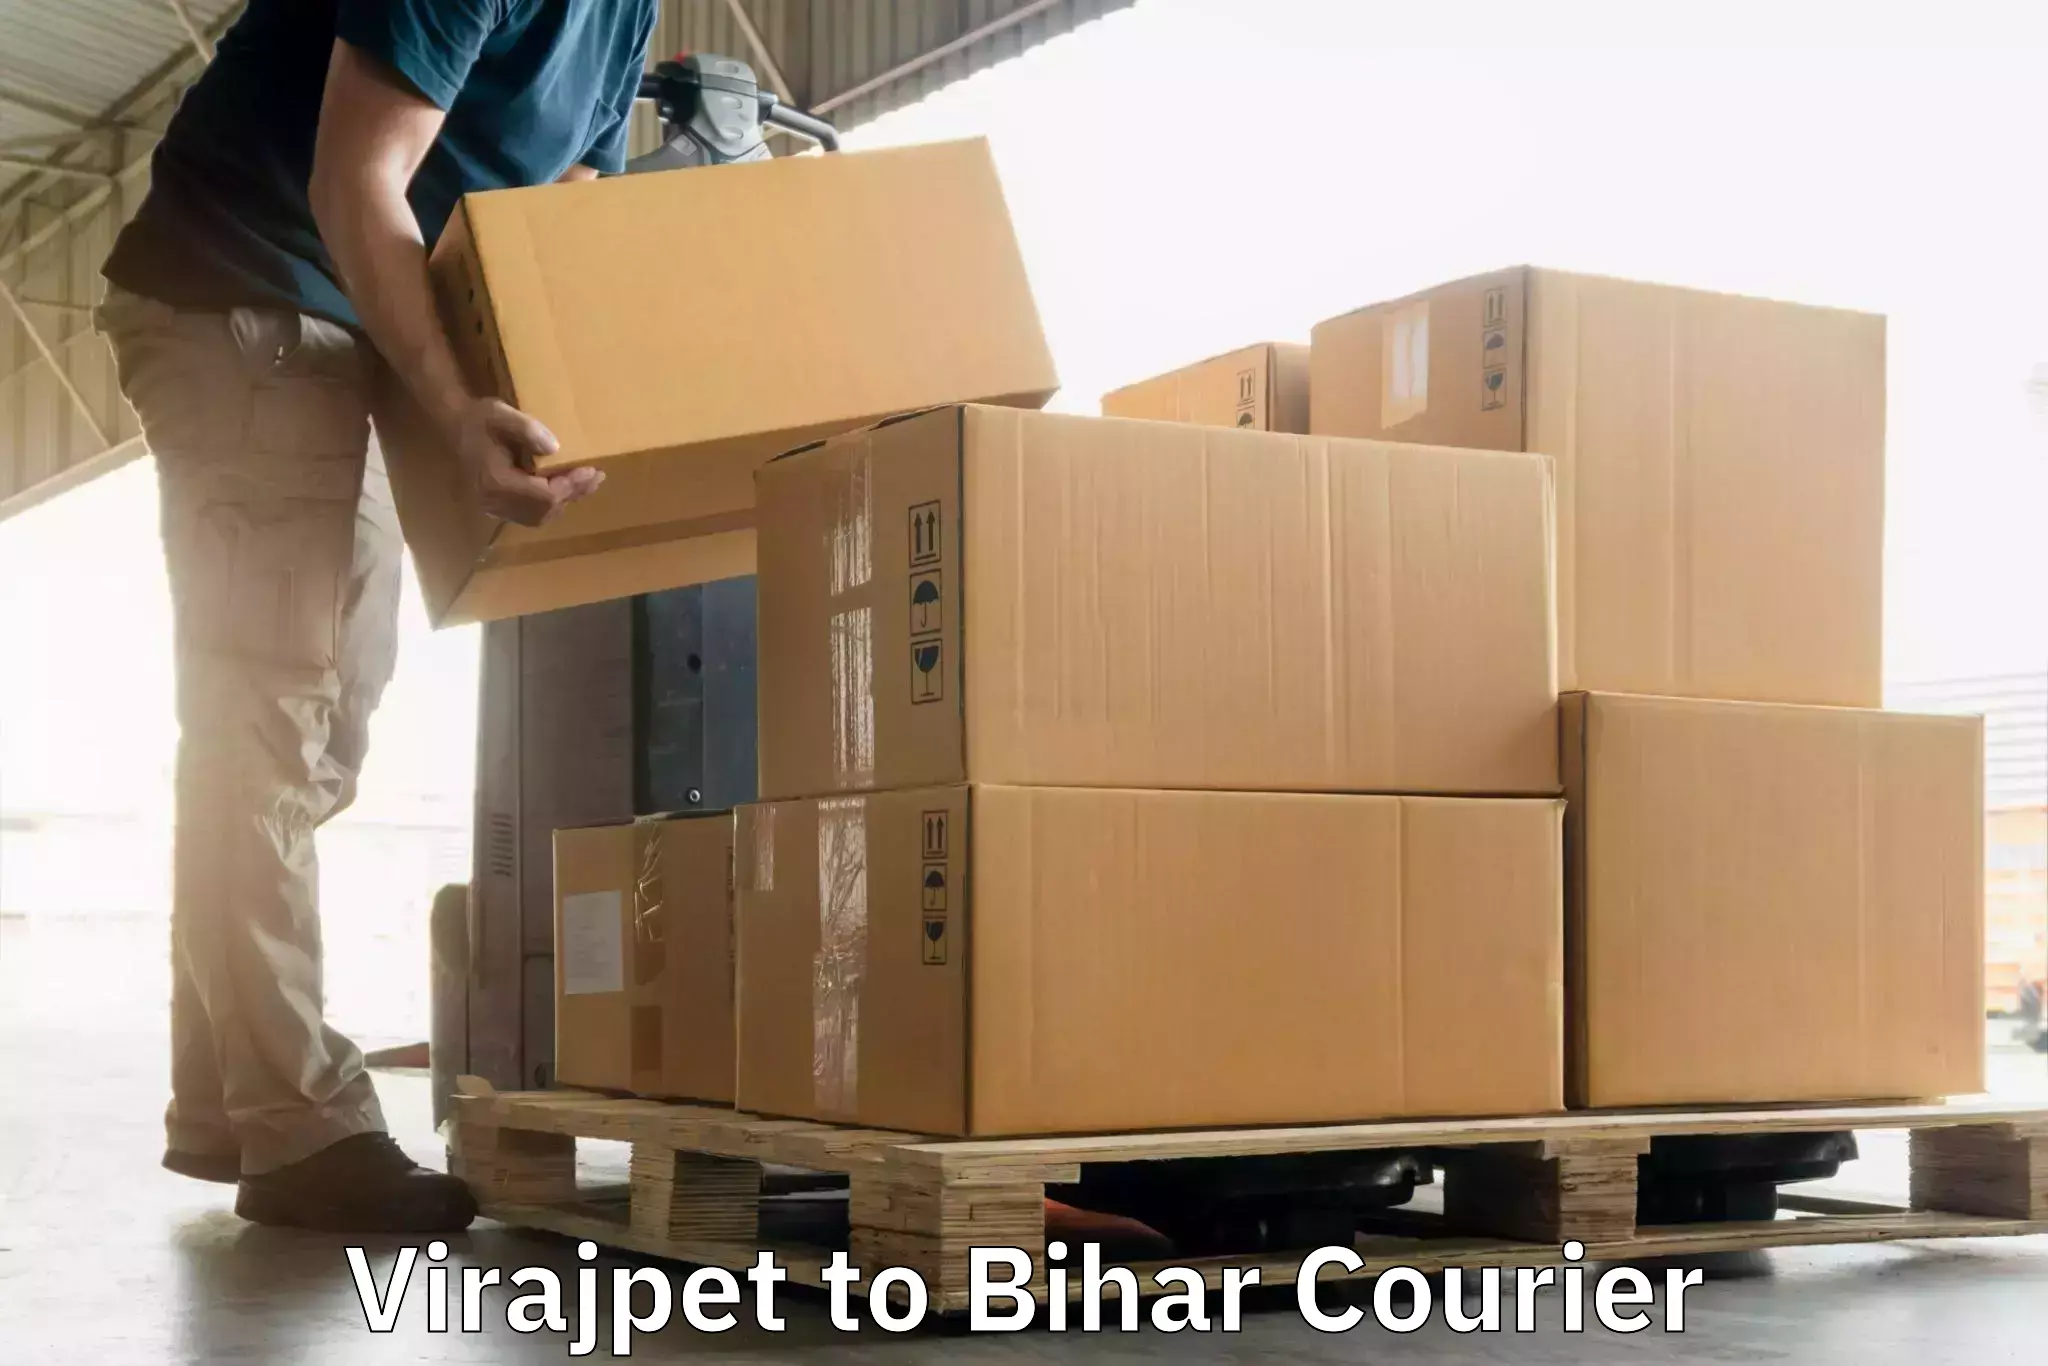 Courier service comparison Virajpet to Dhaka